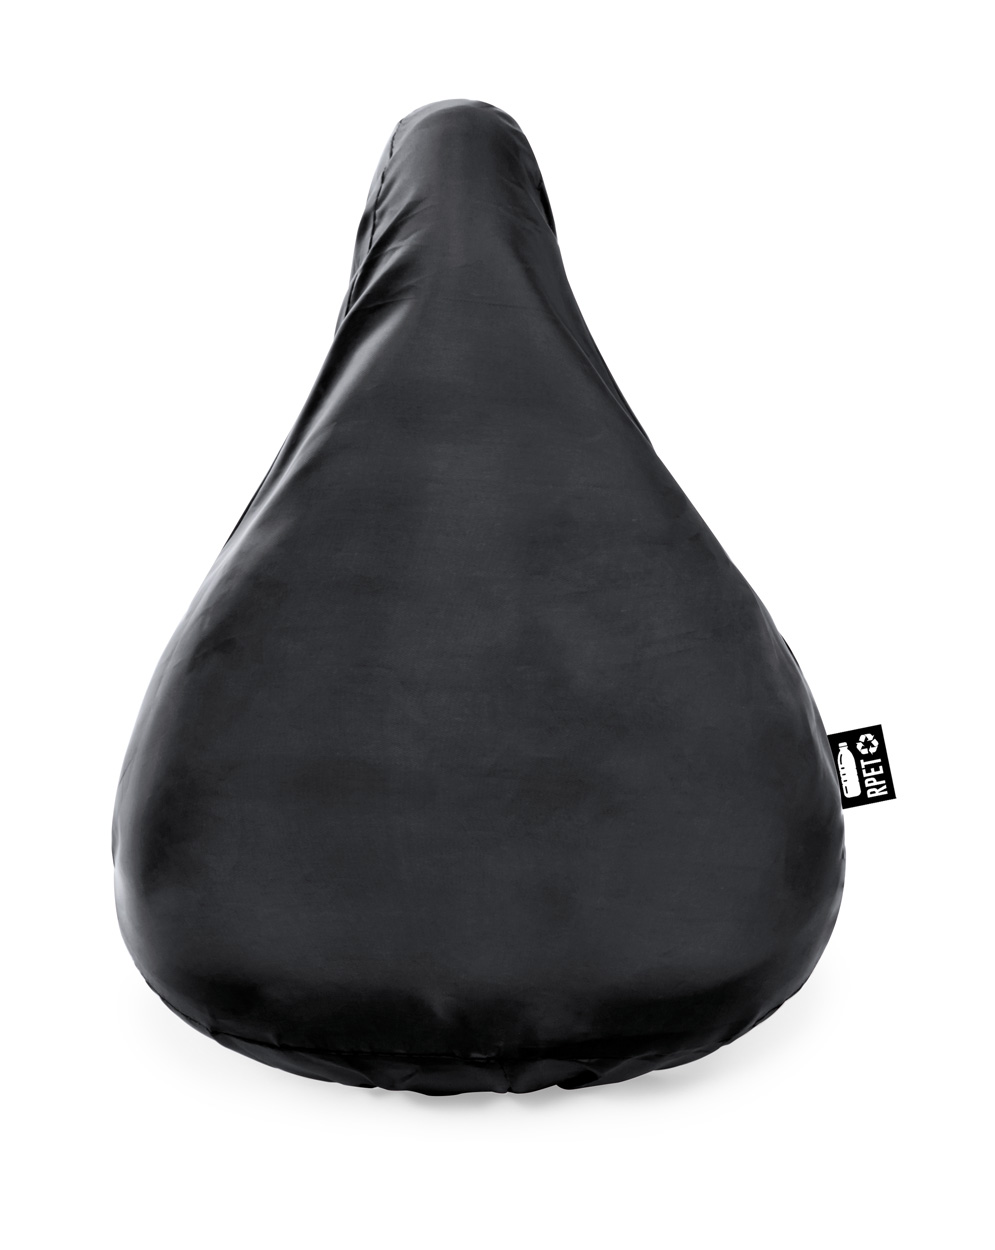 Mapol RPET seat cover - black